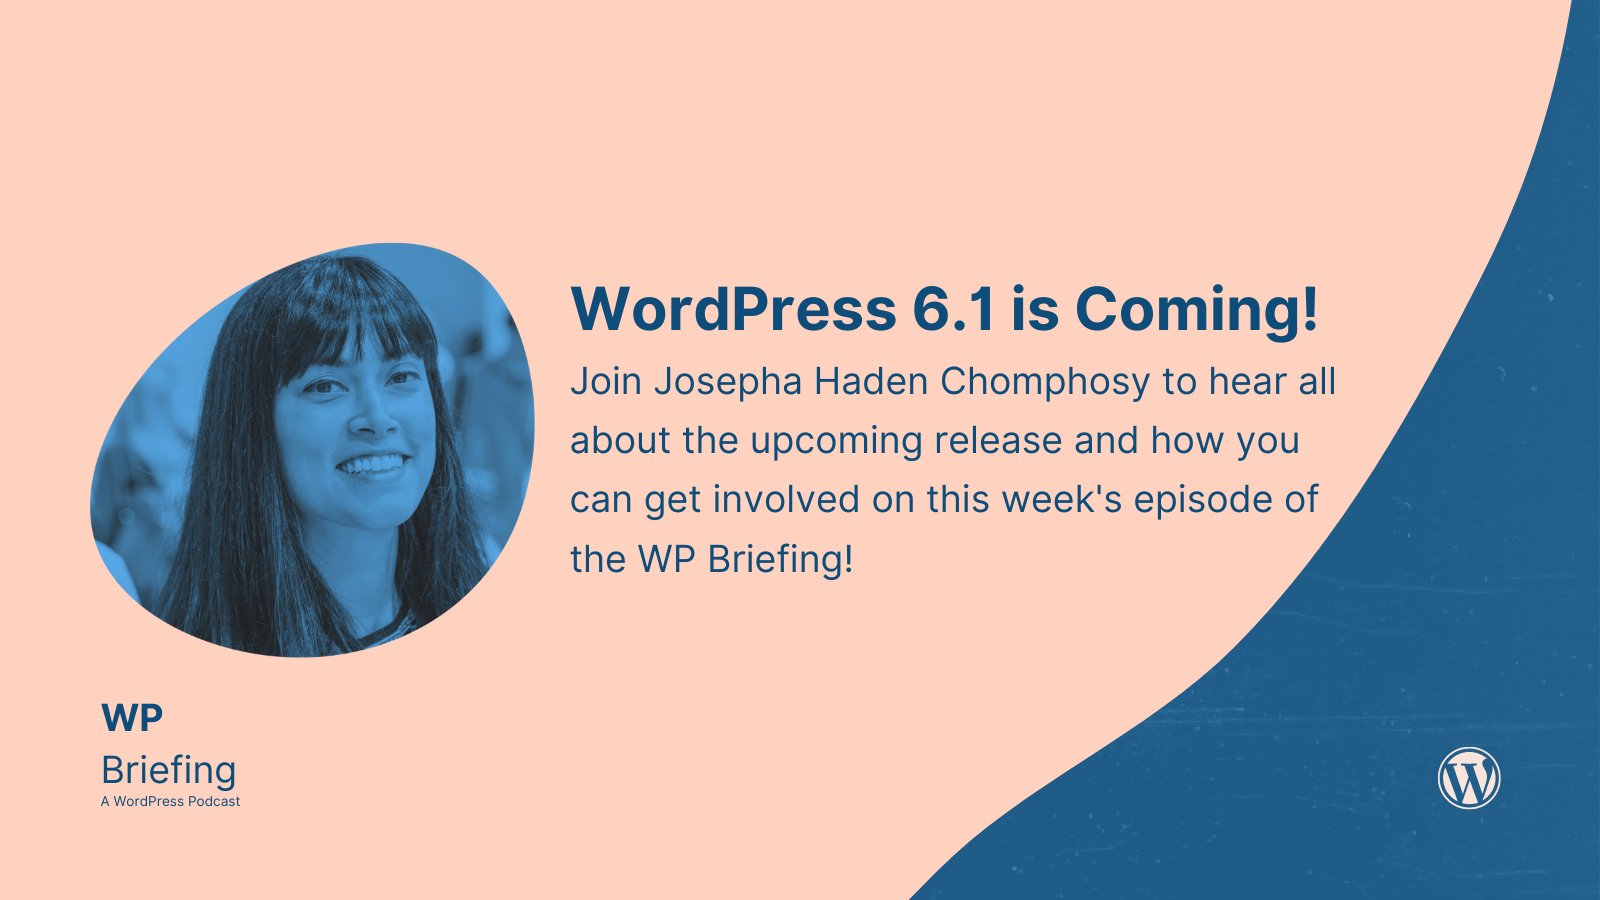 Blue and pink background with image of Josepha Haden Chomphosy and text, "WordPress 6.1 is coming! Join Josepha Haden Chomphosy to hear all about the upcoming release and how you can get involved in this week's episode of the WP Briefing."